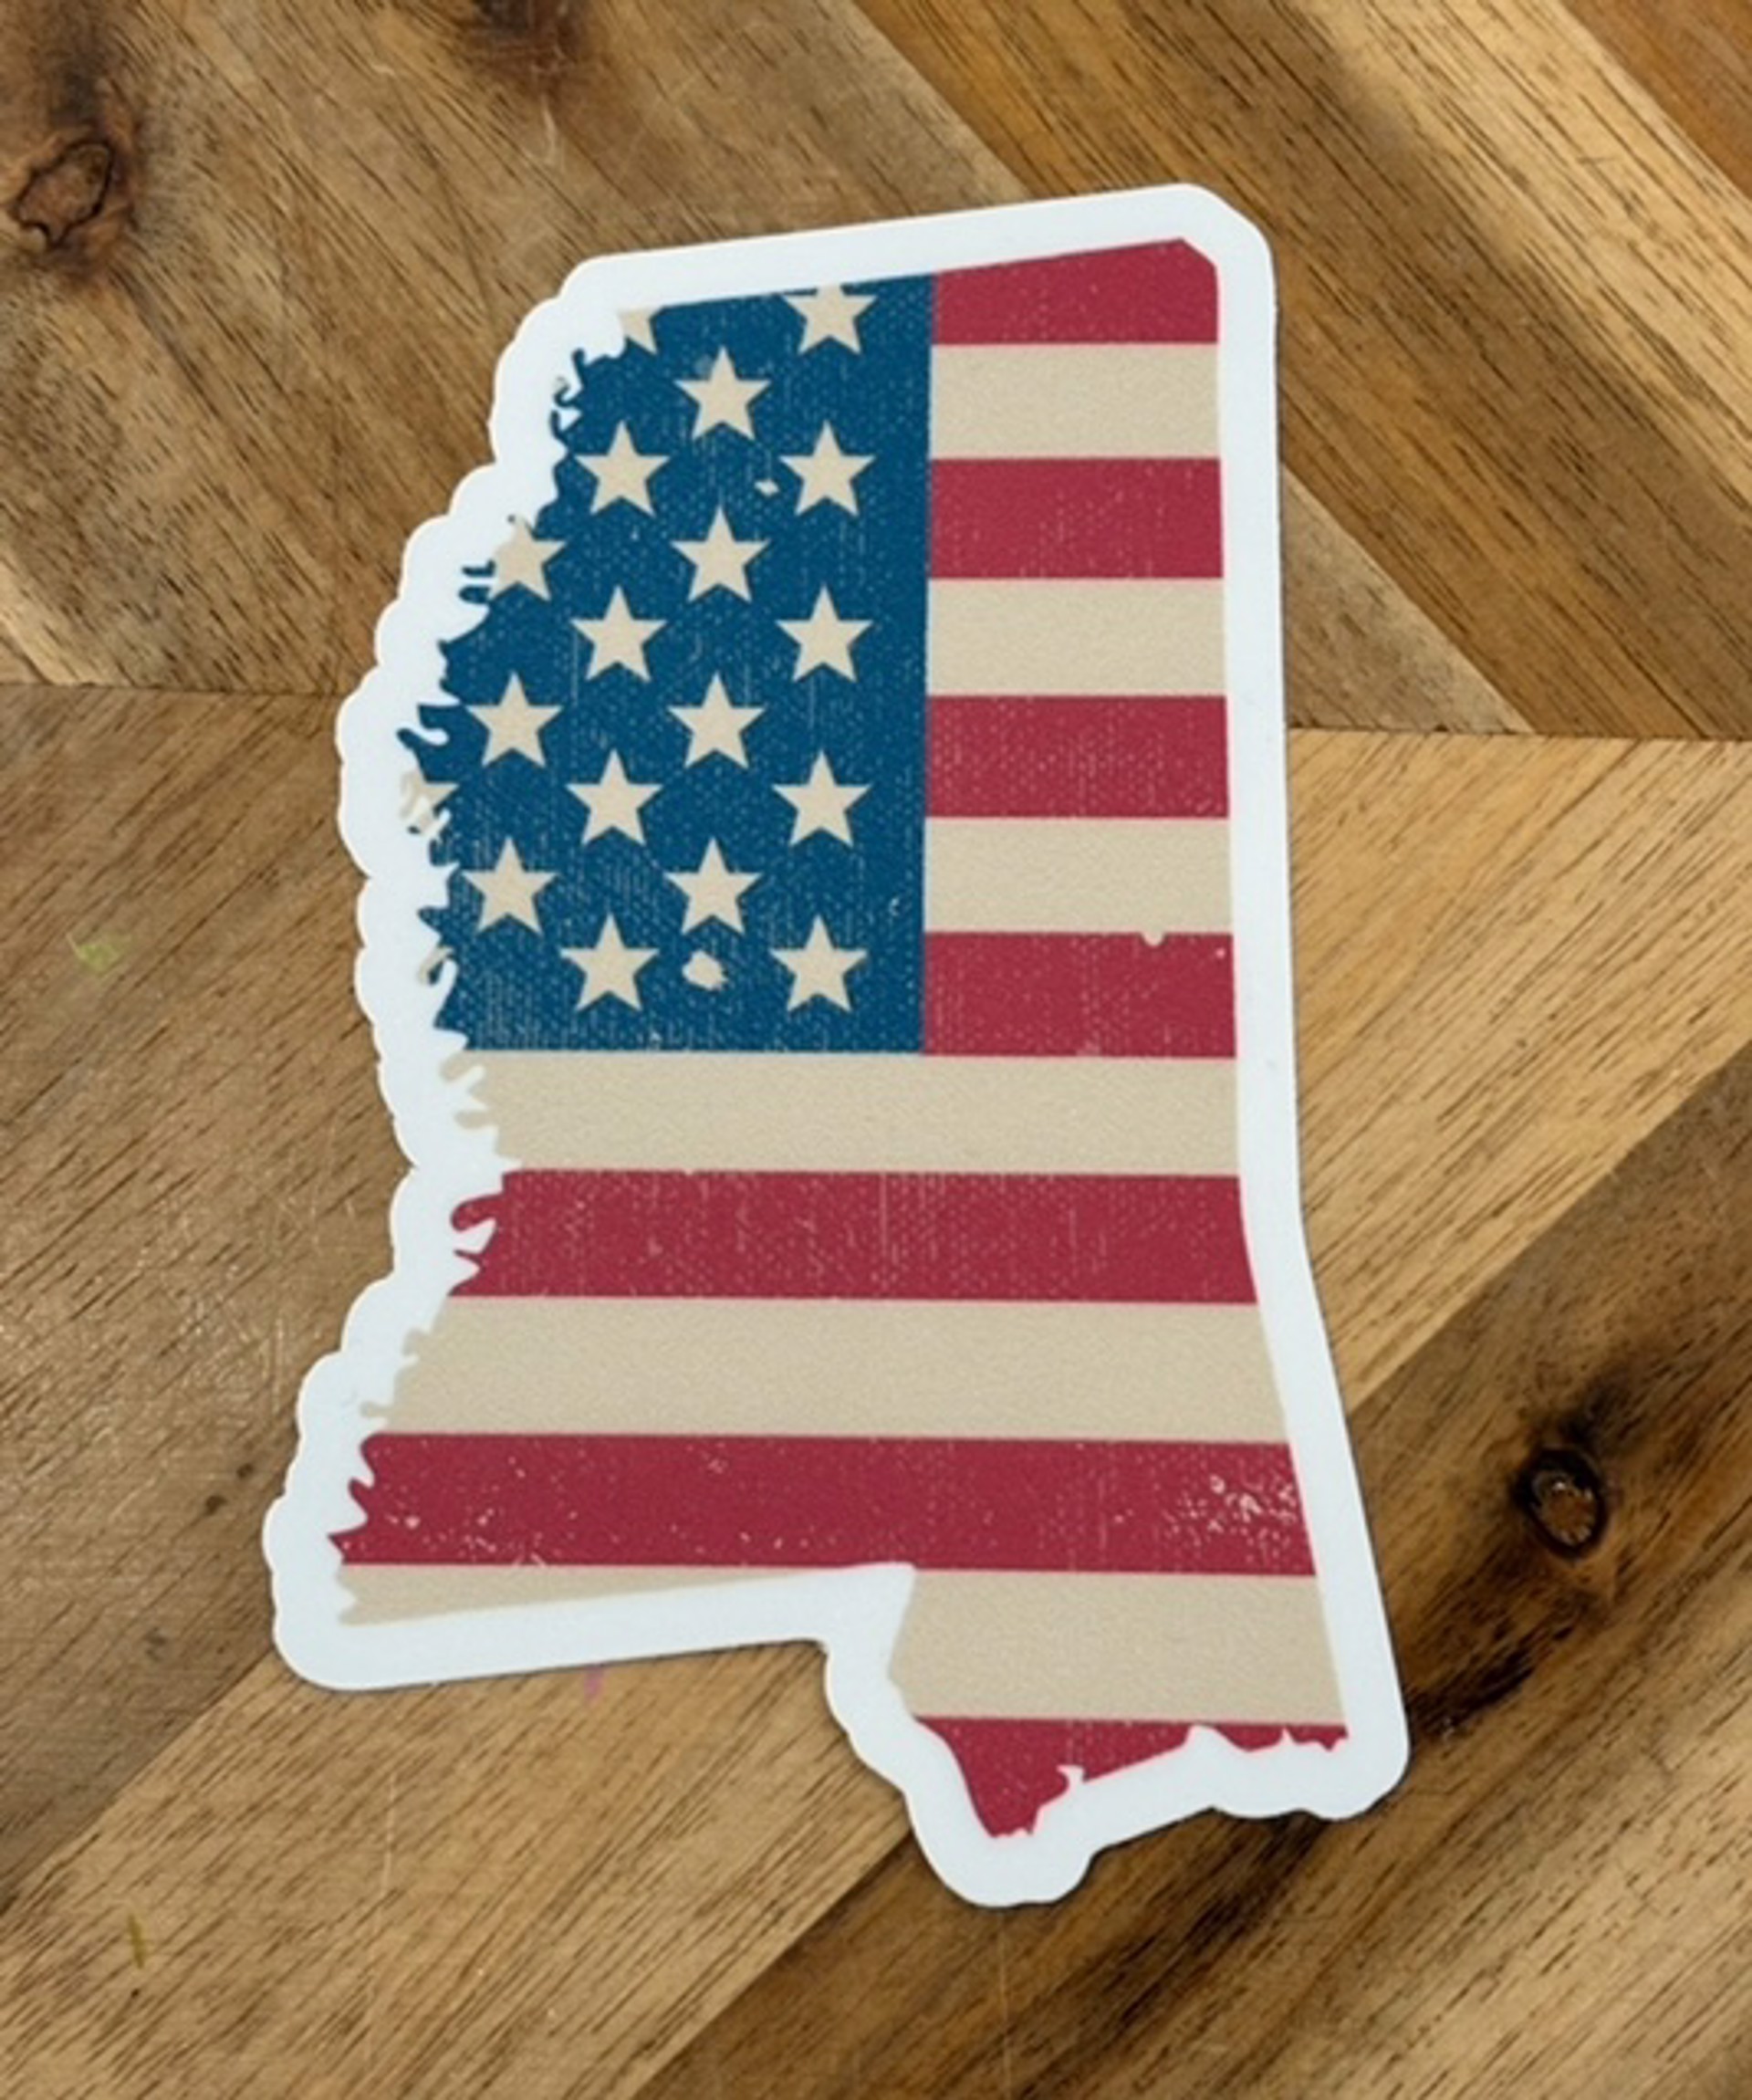 Mississippi American Flag Sticker by Pacesetter Merchandise